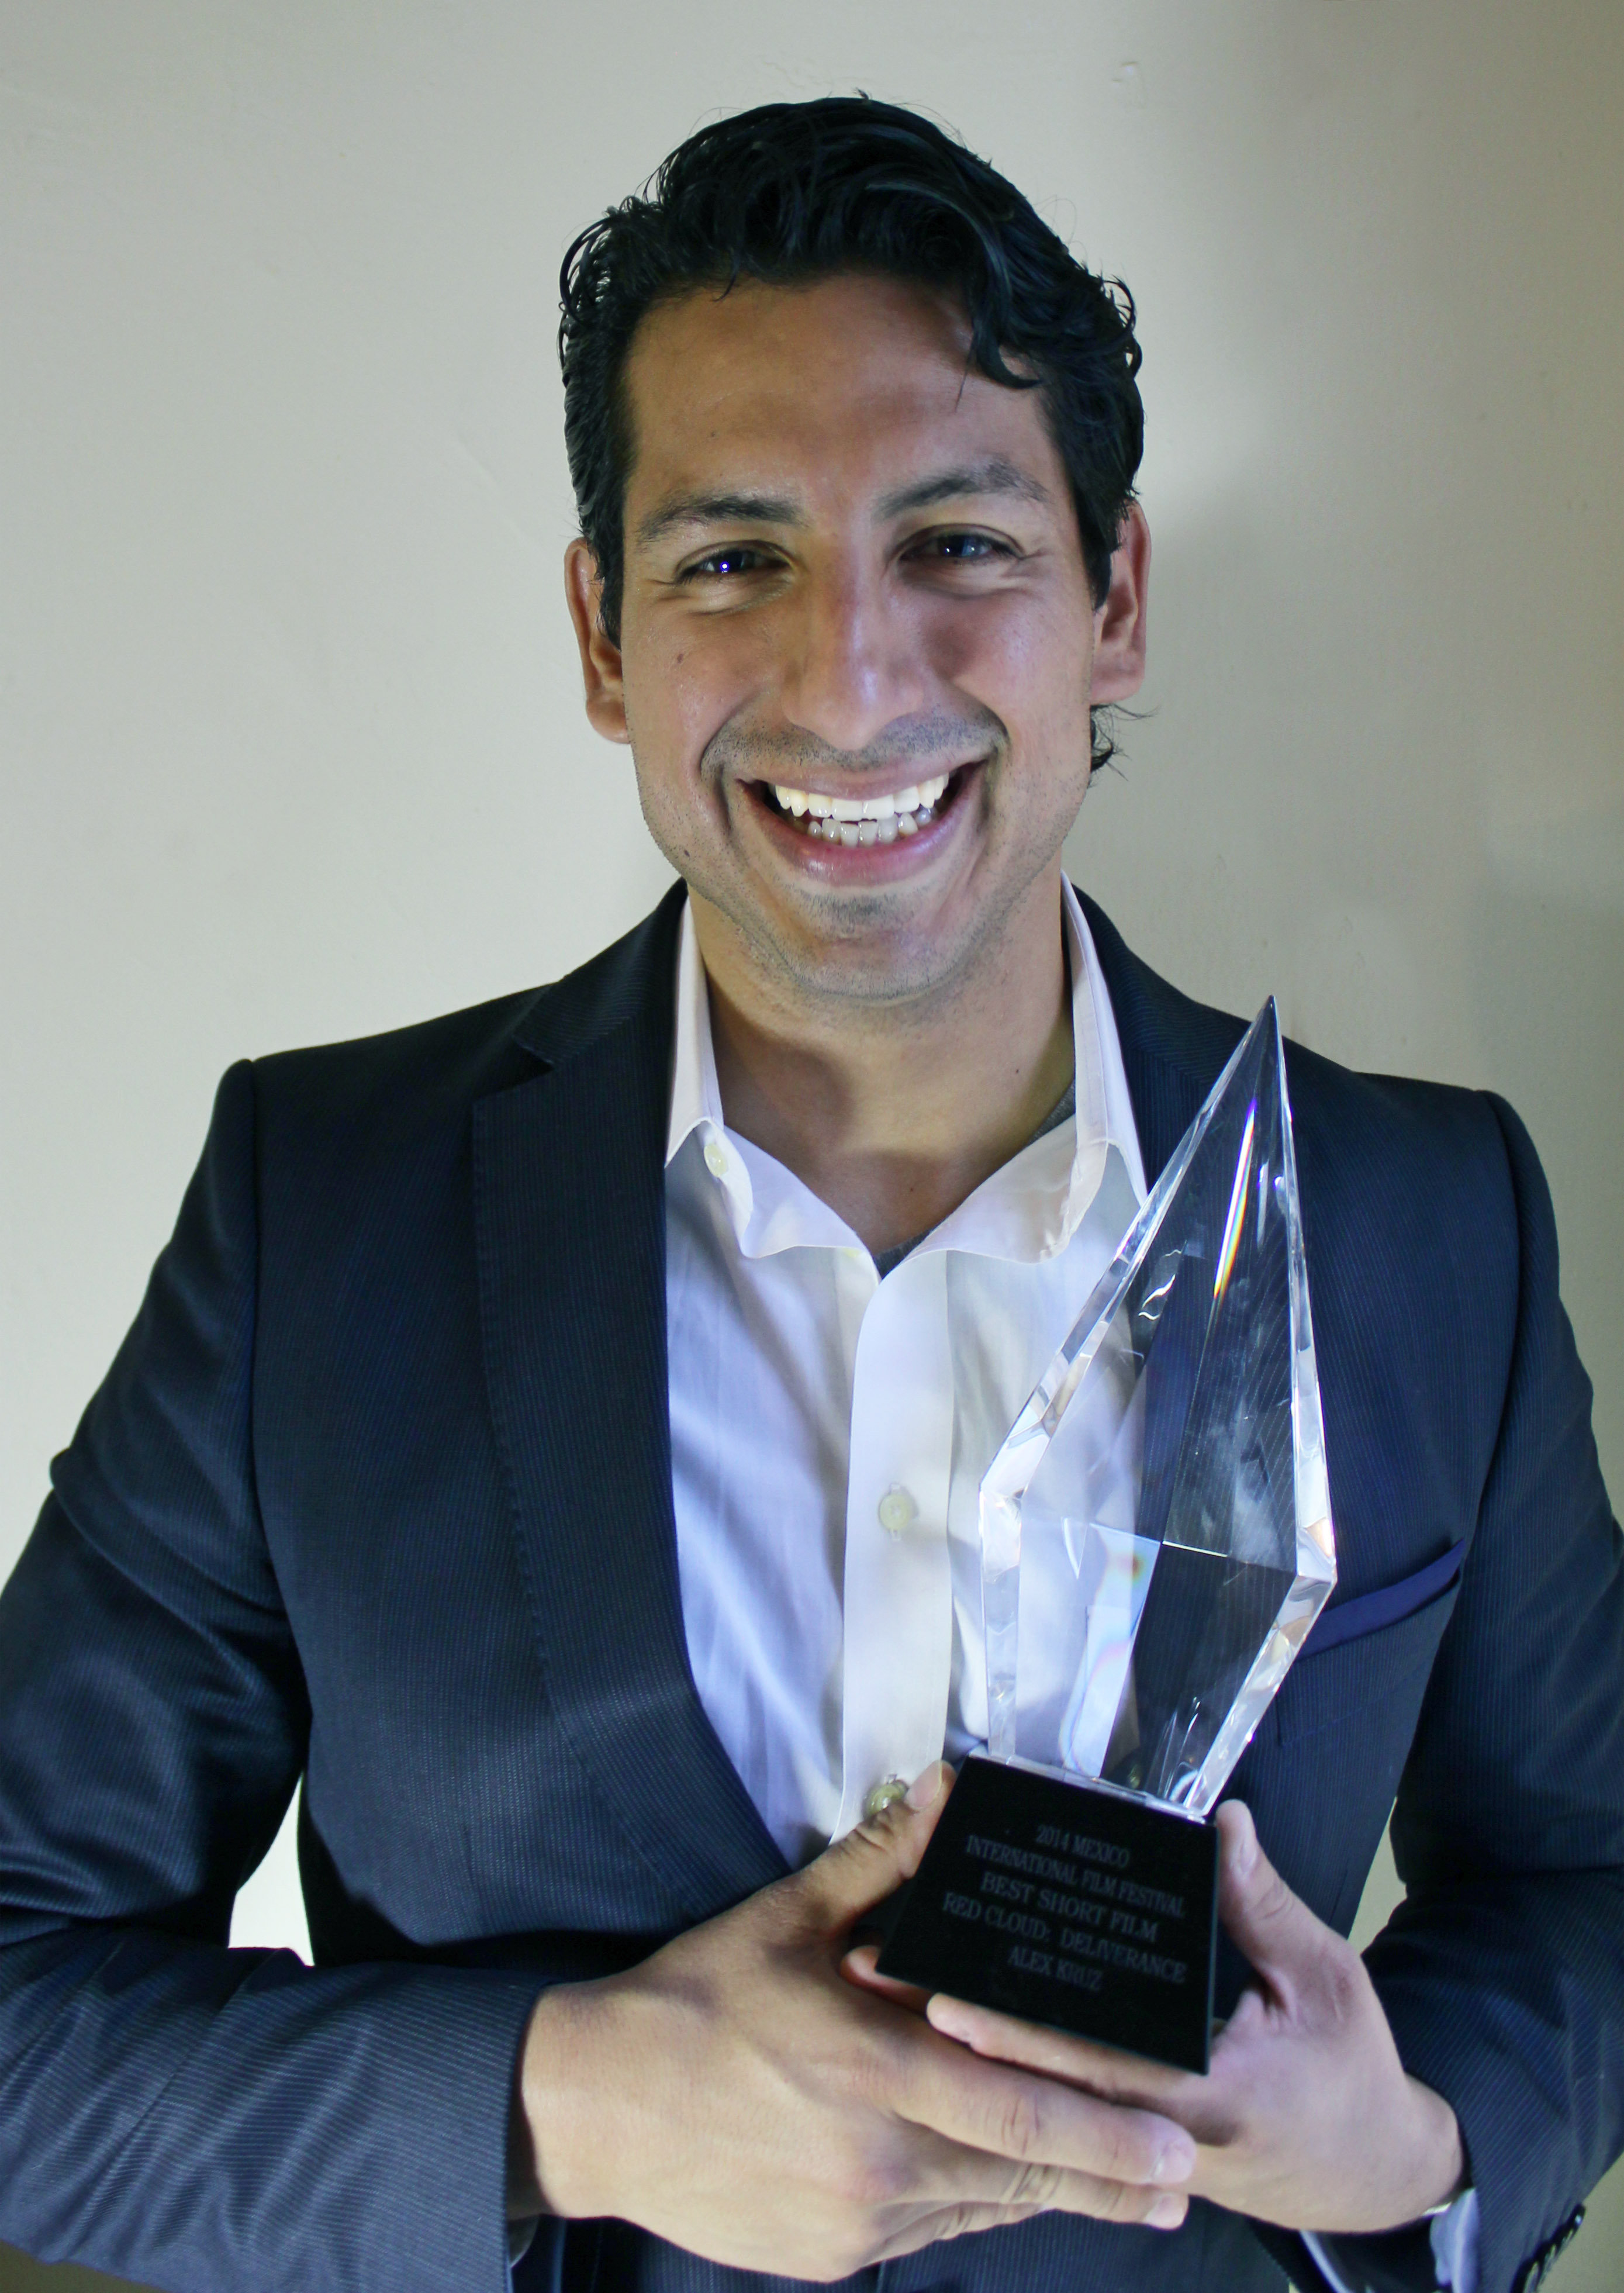 Alex Kruz with the crystal trophy award for the Best Short Film 2014 at MEXICO International Film Festival